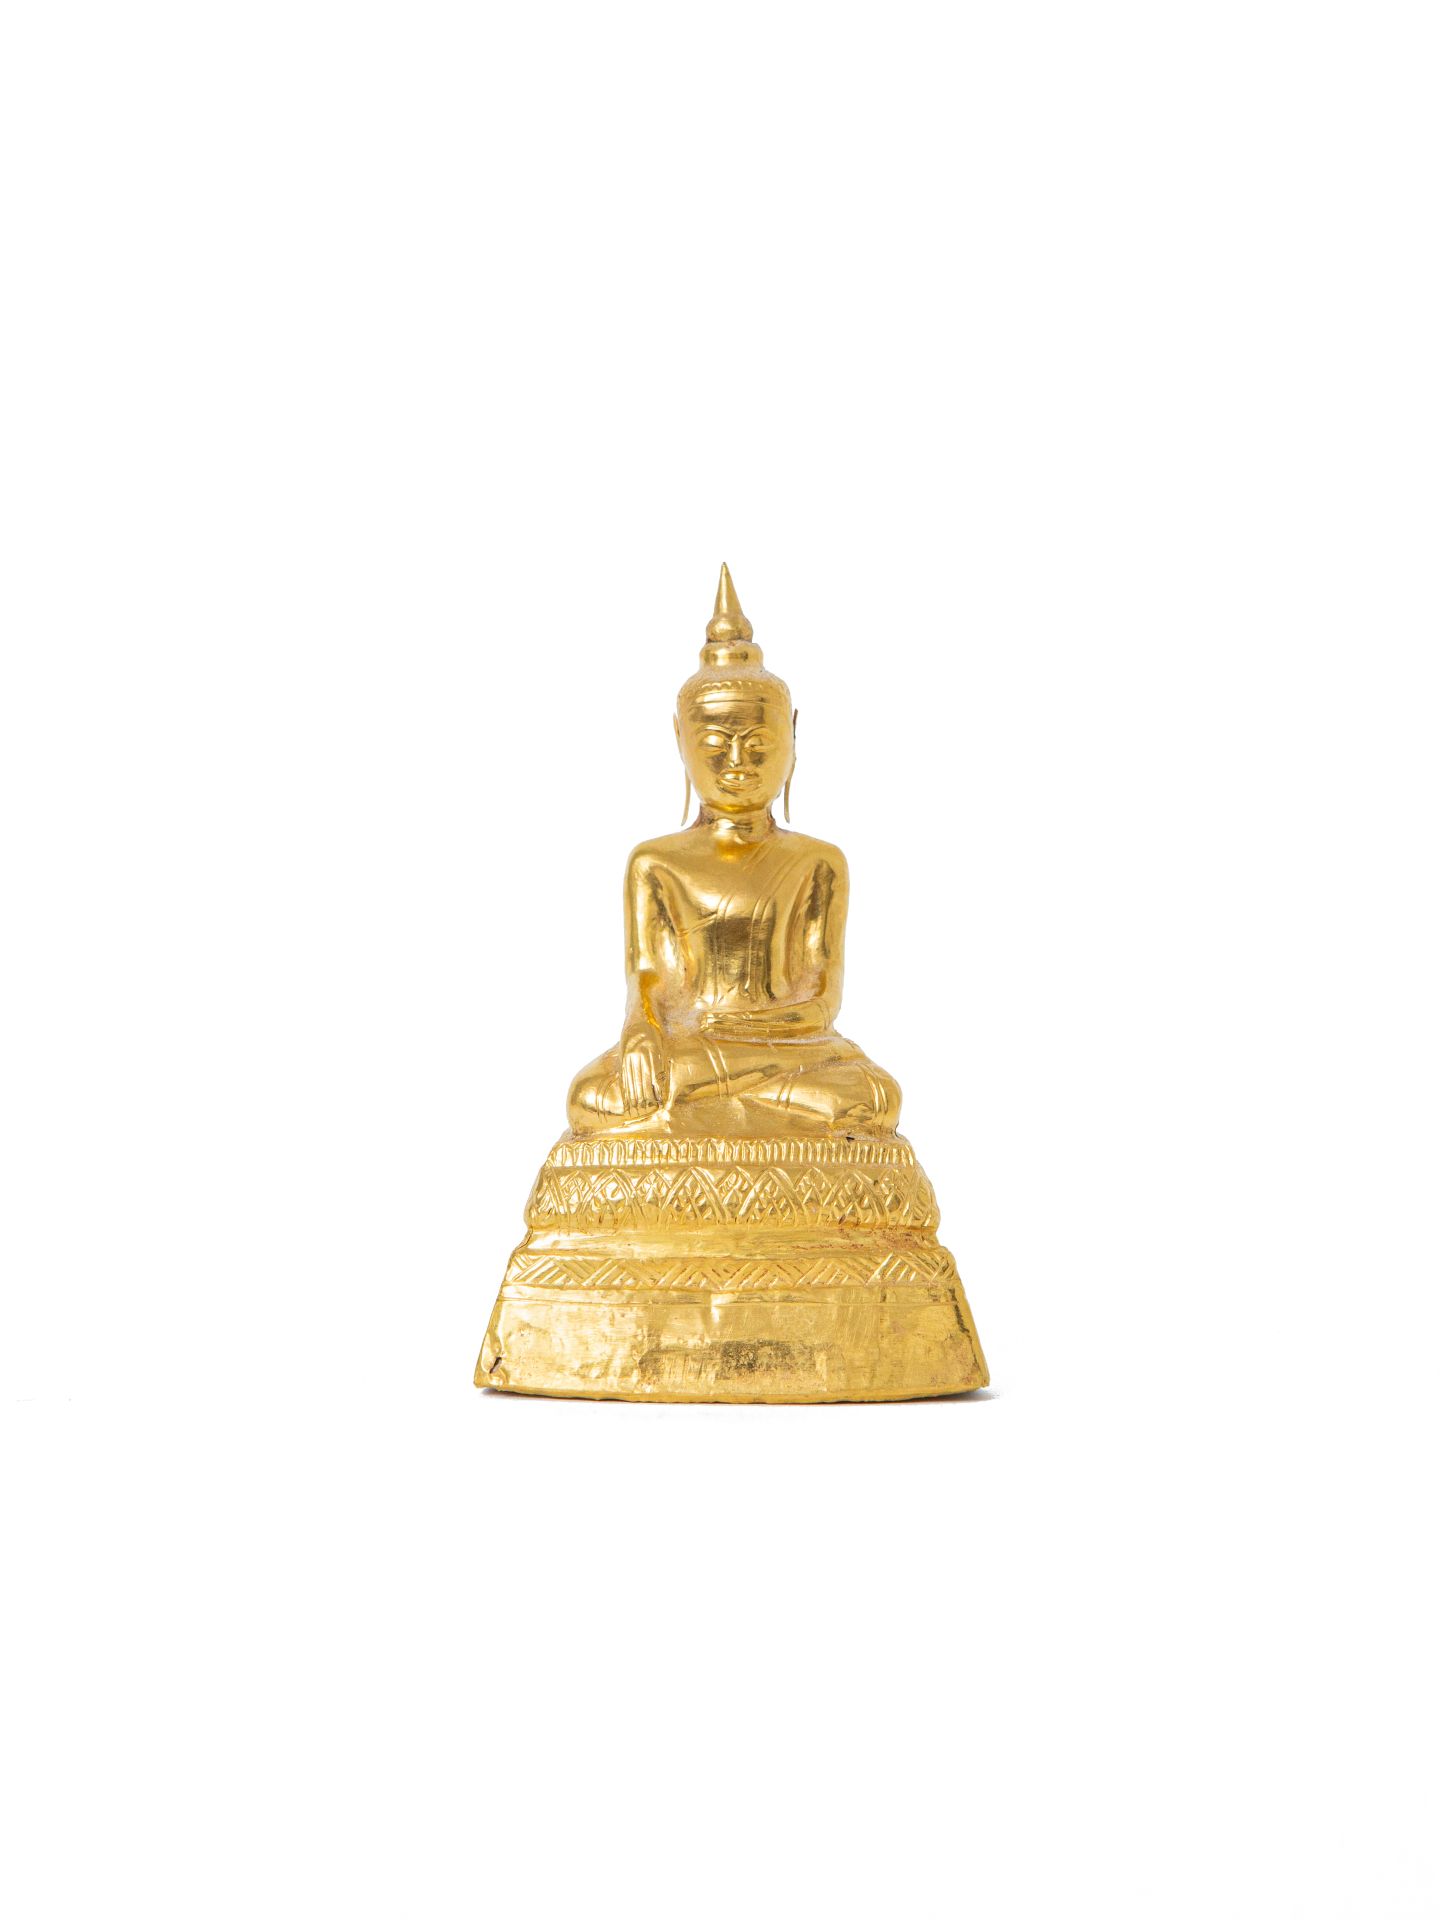 Null Cambodia or Thailand, Ayutthaya Kingdom, late period

A gold embossed Buddh&hellip;